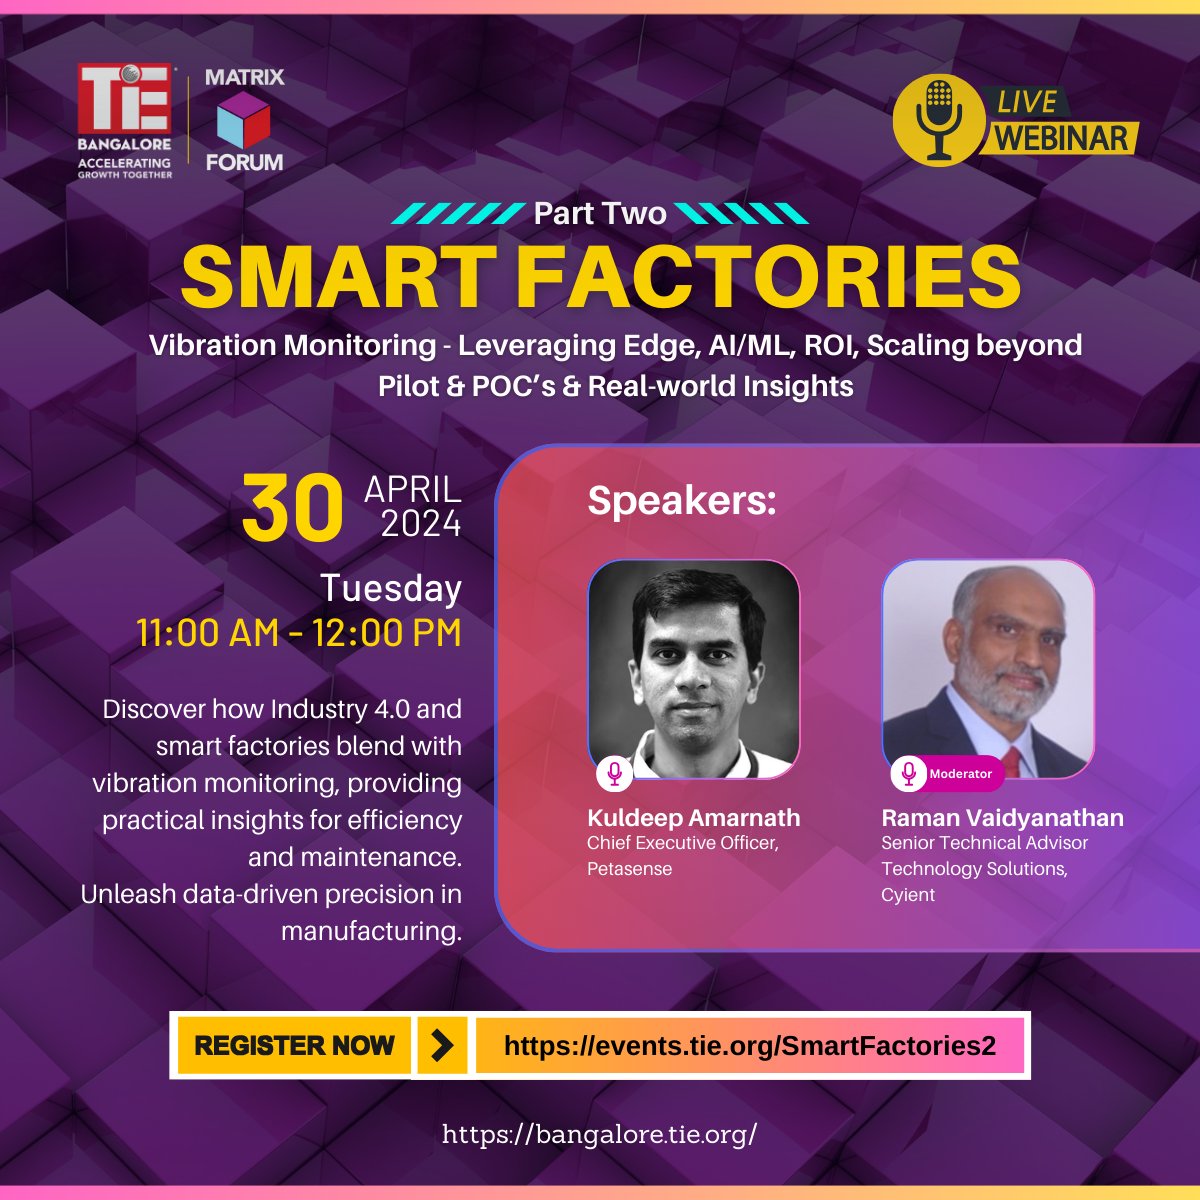 Exciting news! 🎉 #SmartFactories: Part 2 webinar series by @Matrix_Forum at TiE Bangalore is here! Hear from industry leaders like Kuldeep Amarnath, CEO of @Petasense, with expert moderation by Raman Vaidyanathan from @Cyient. 

Register now: events.tie.org/SmartFactories2